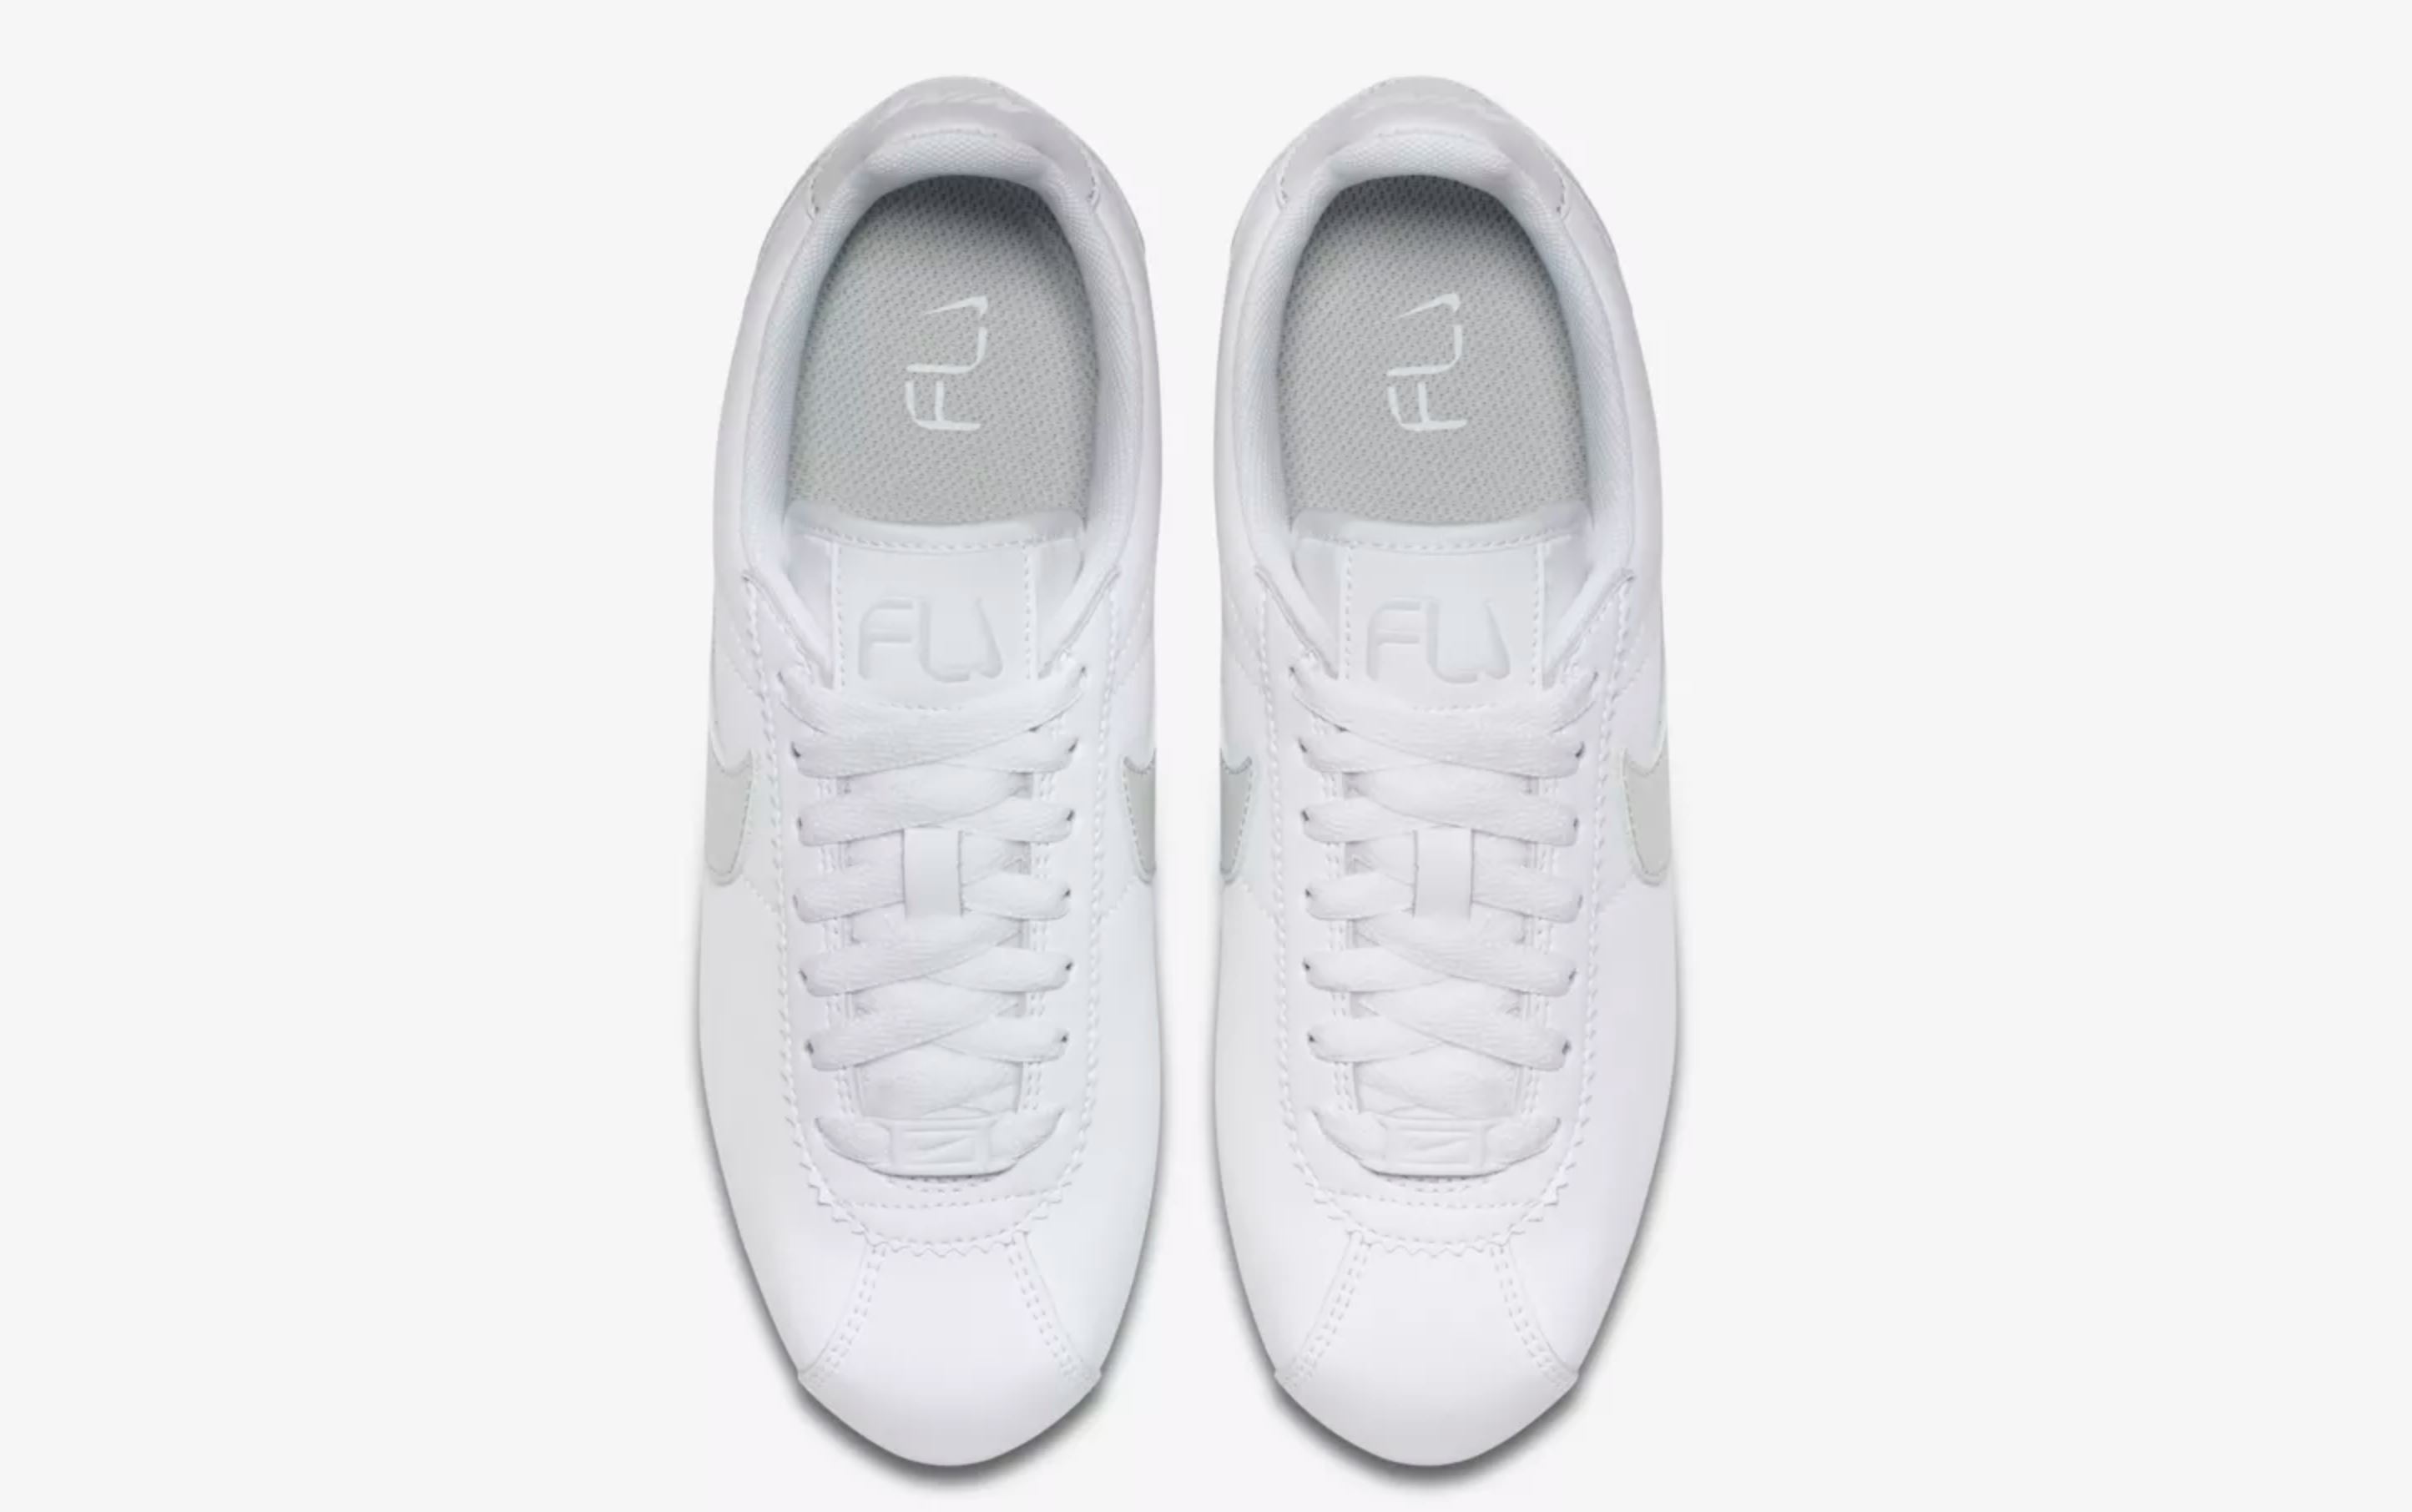 The Nike Classic Cortez Flyleather is a Sustainable Women's Footwear ...